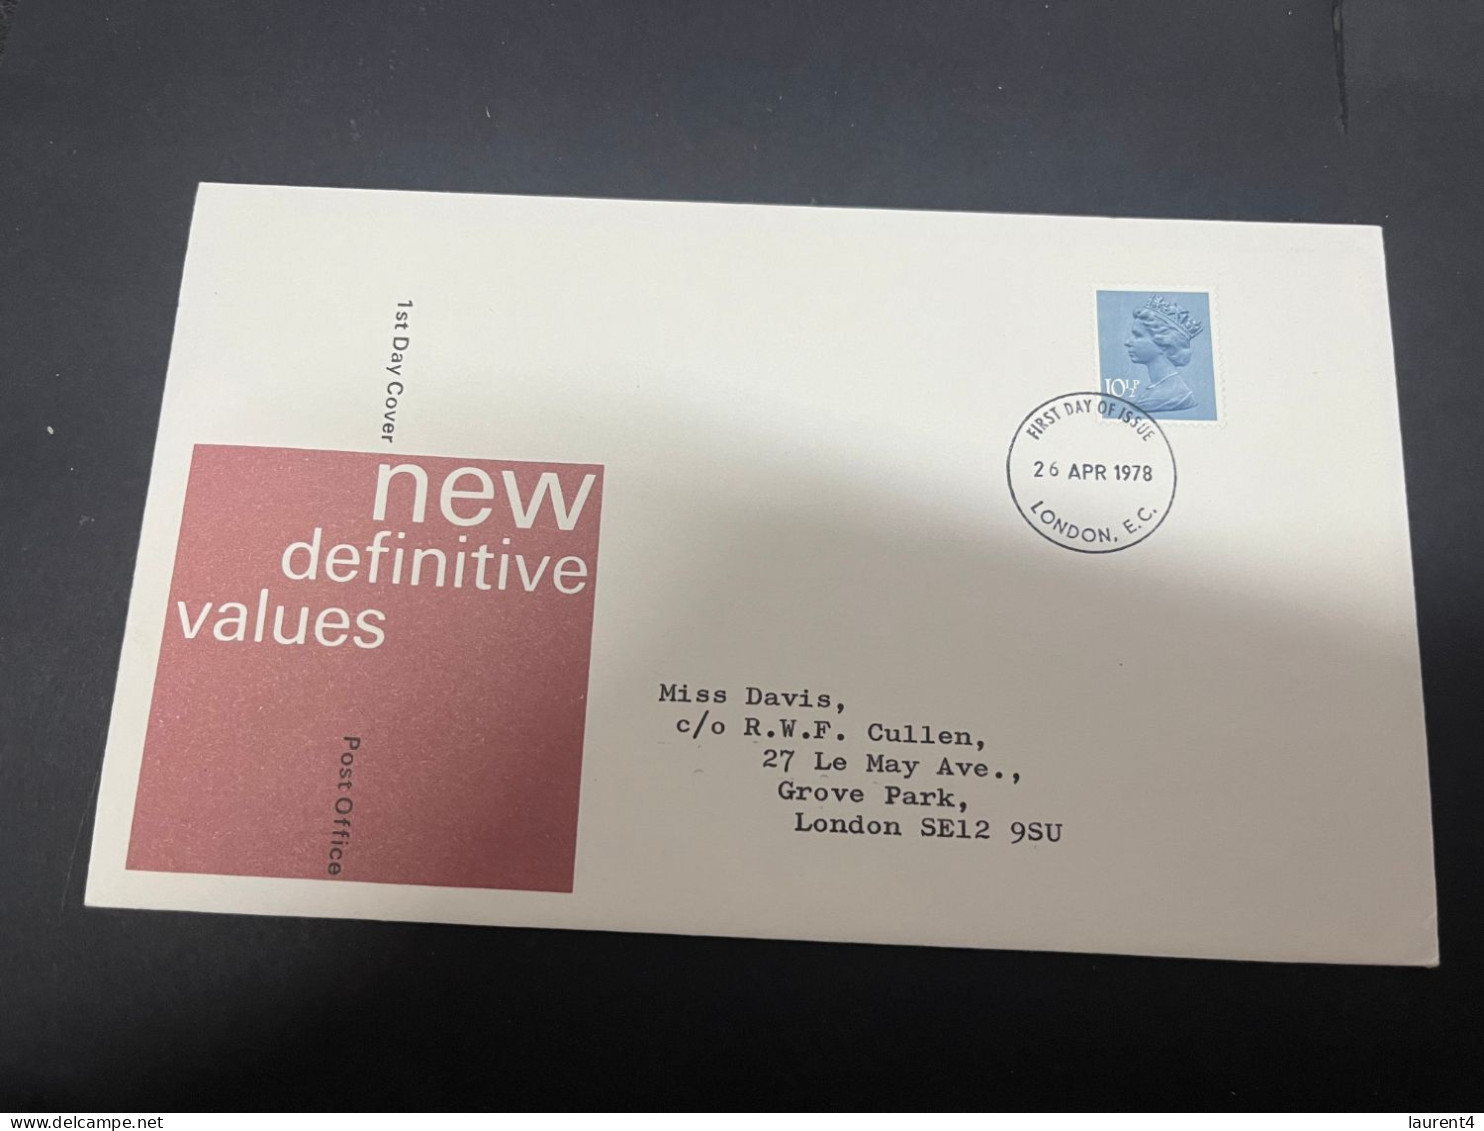 8-2-2024 (3 X 39) UK (Great Britain) FDC - 1978 - New Definitive Value - 1971-1980 Decimal Issues